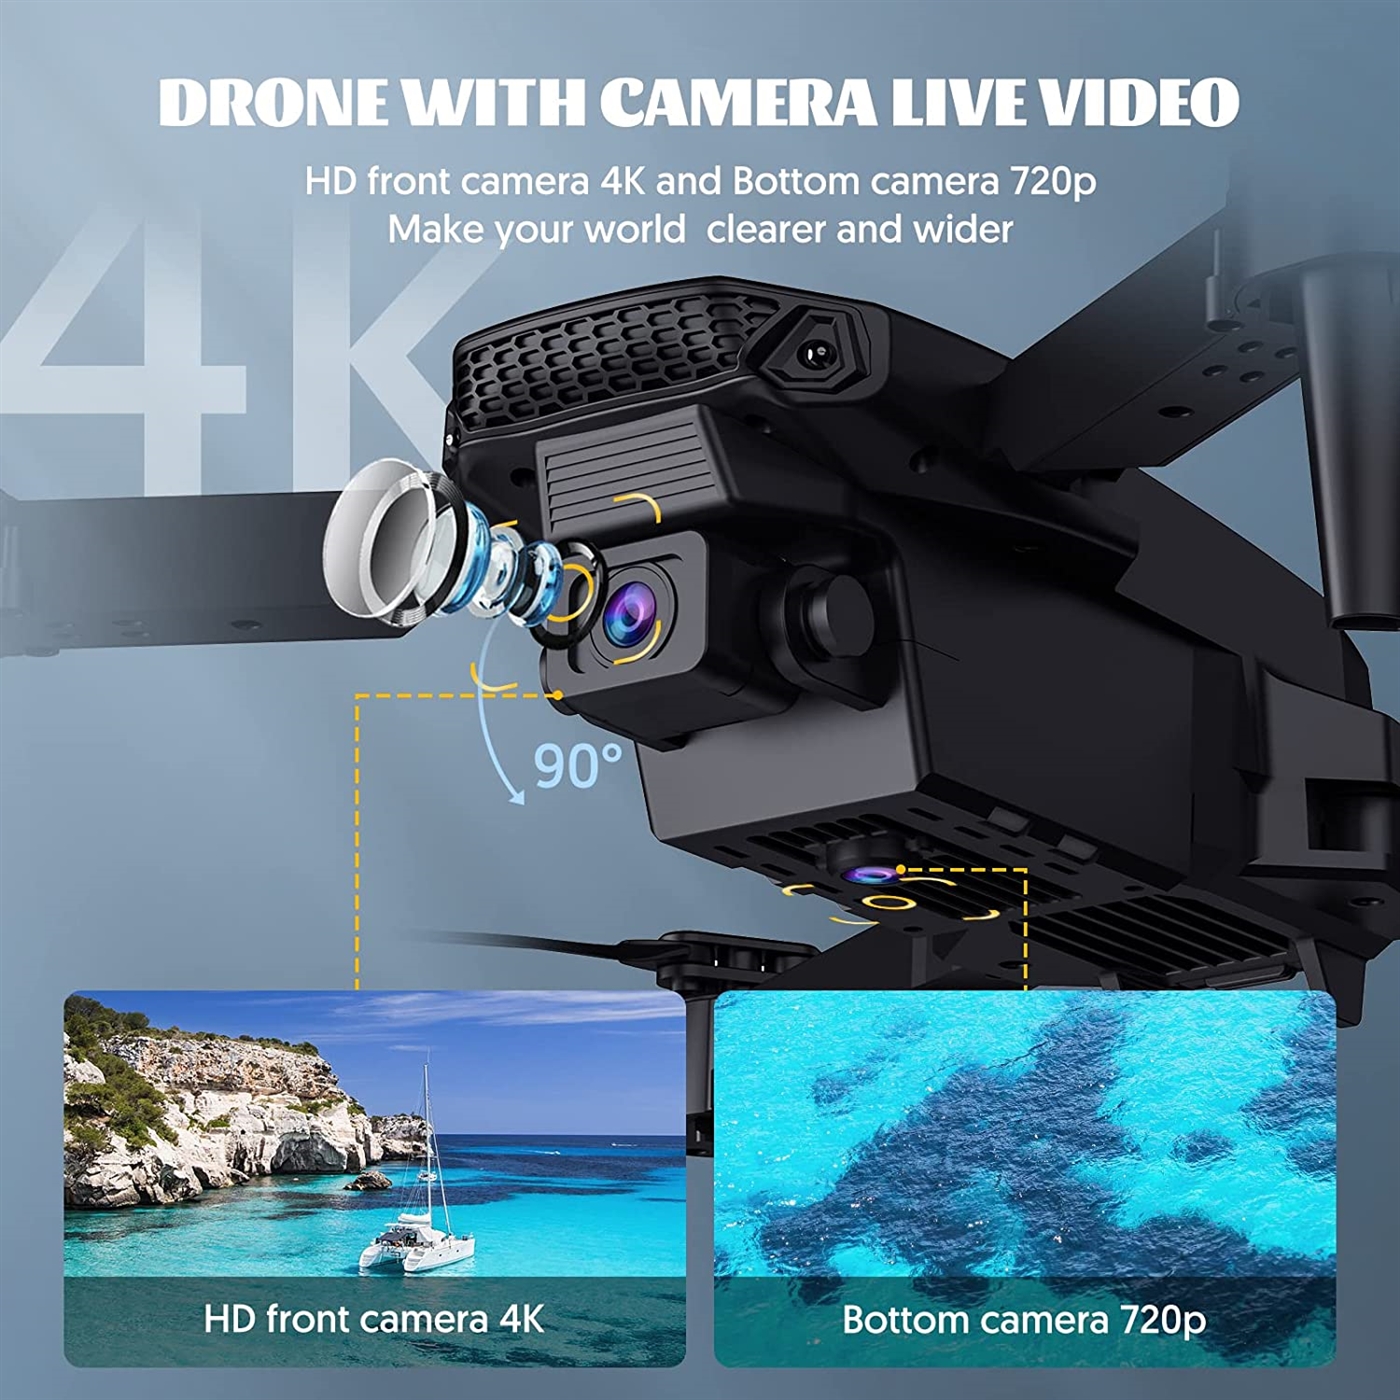 drone with HD camera live video